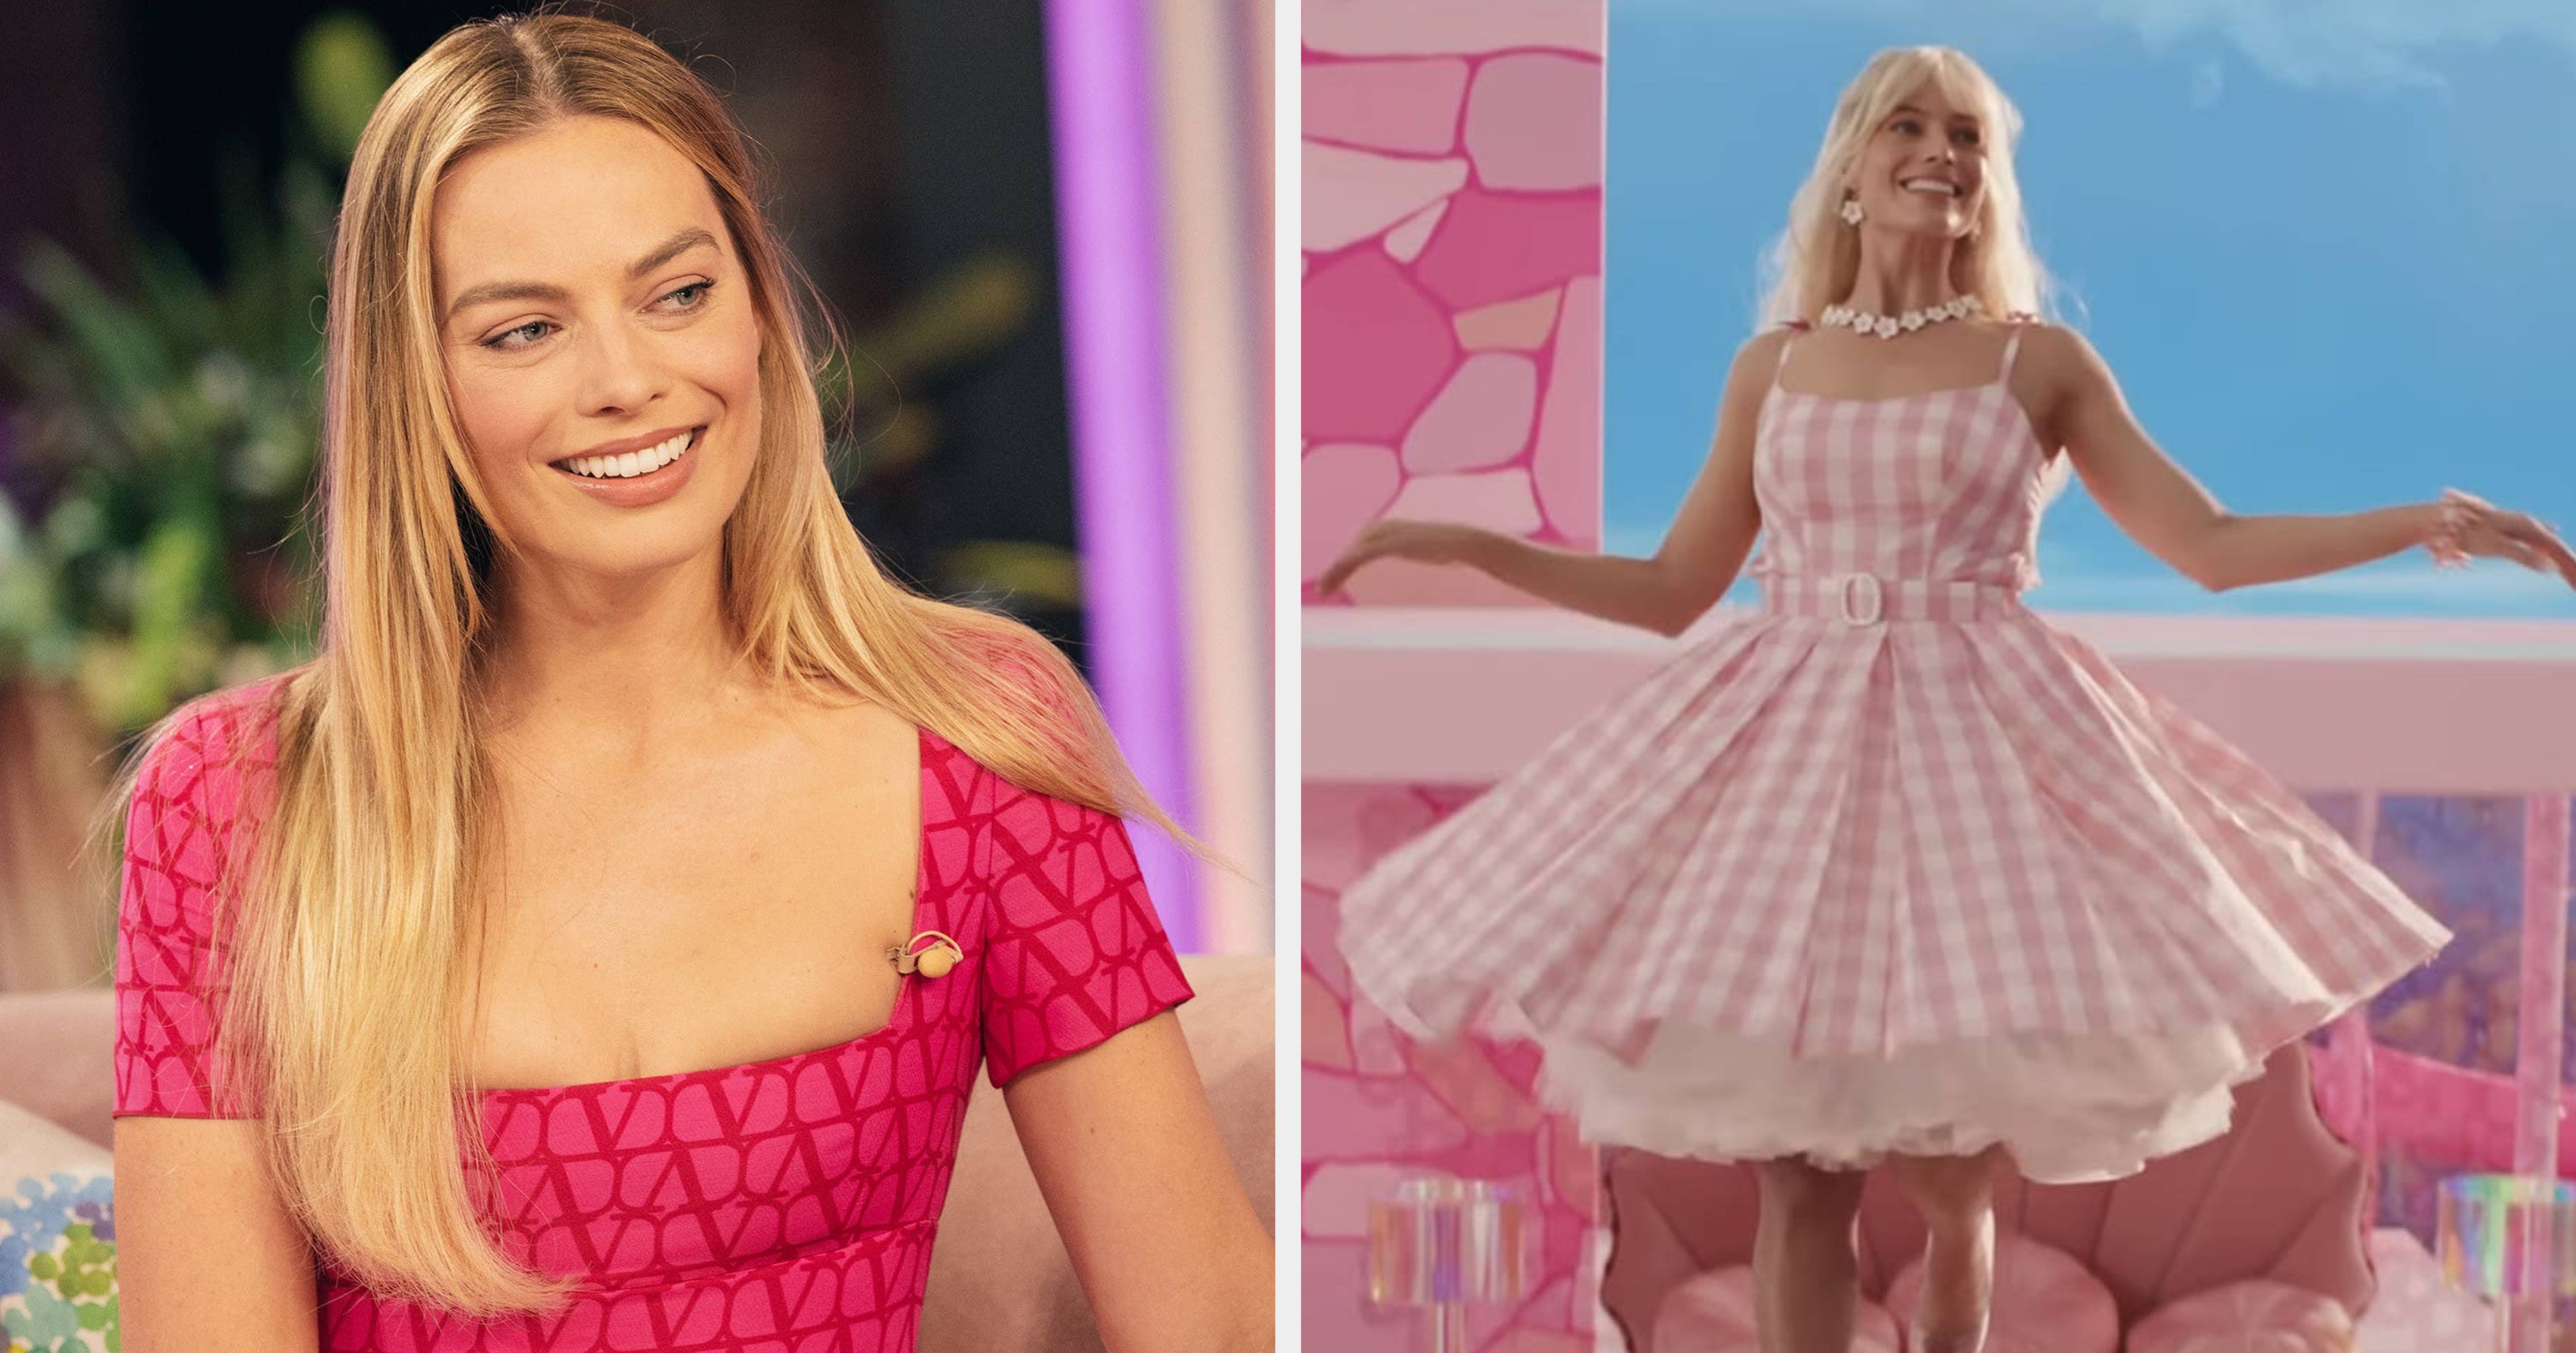 Margot Robbie Had One Request Before Filming The “Barbie” Movie,